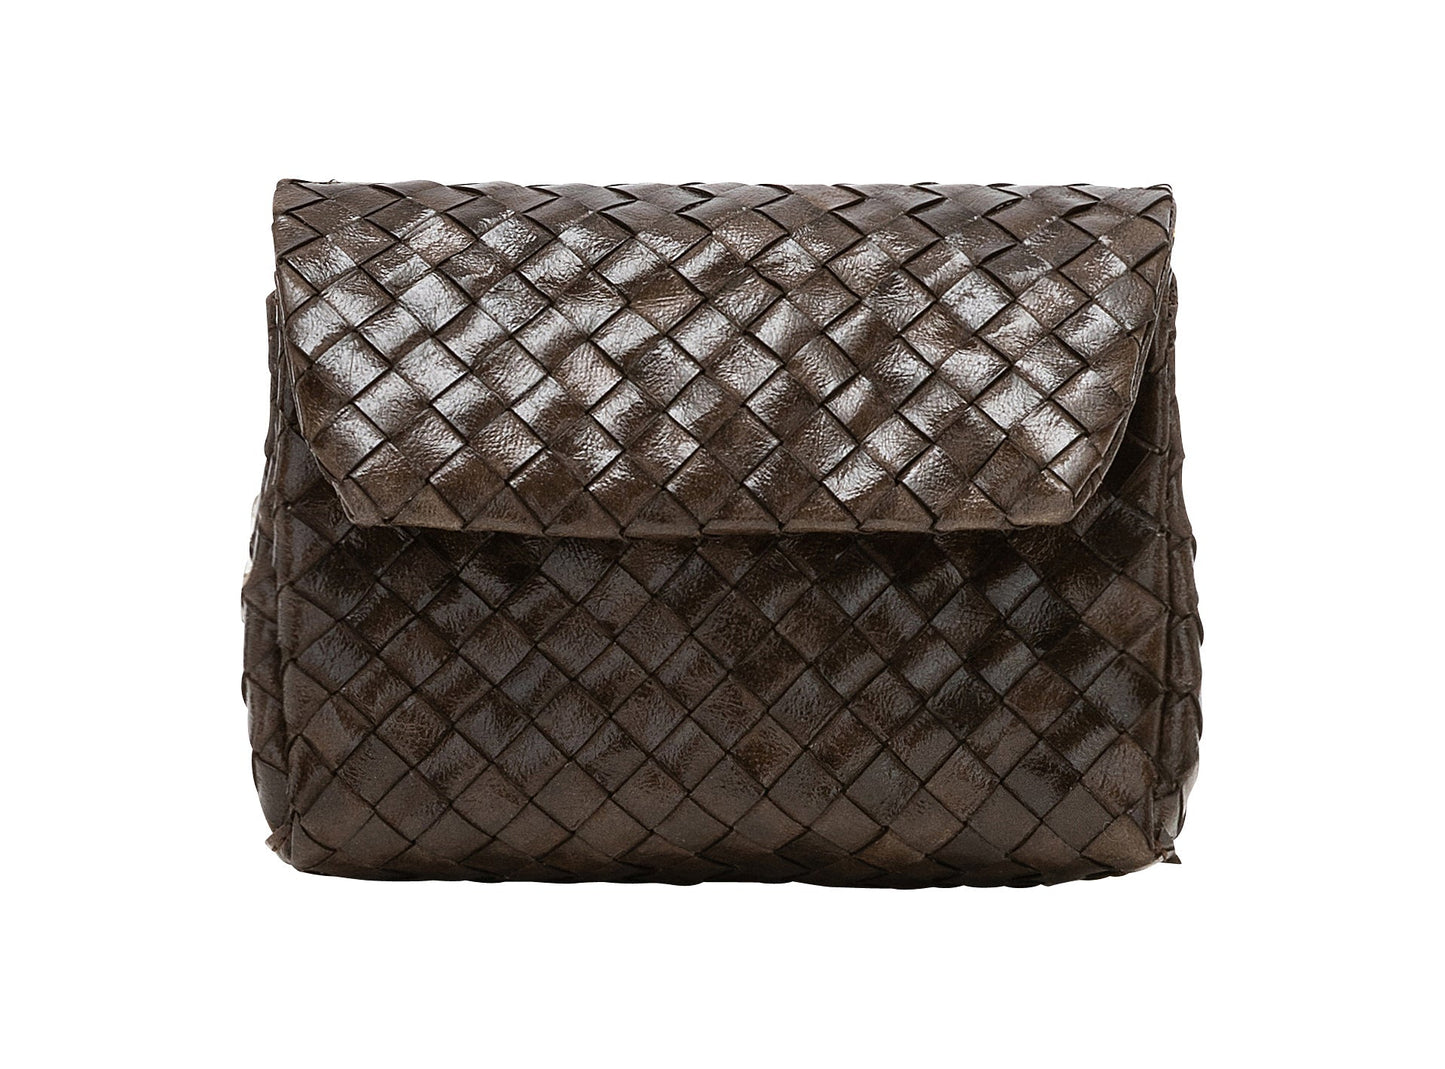 A small woven washable paper handbag is shown. The bag has a front flap closure and a washable paper strap attached to the bag by metal clips. The bag is shown in dark brown.